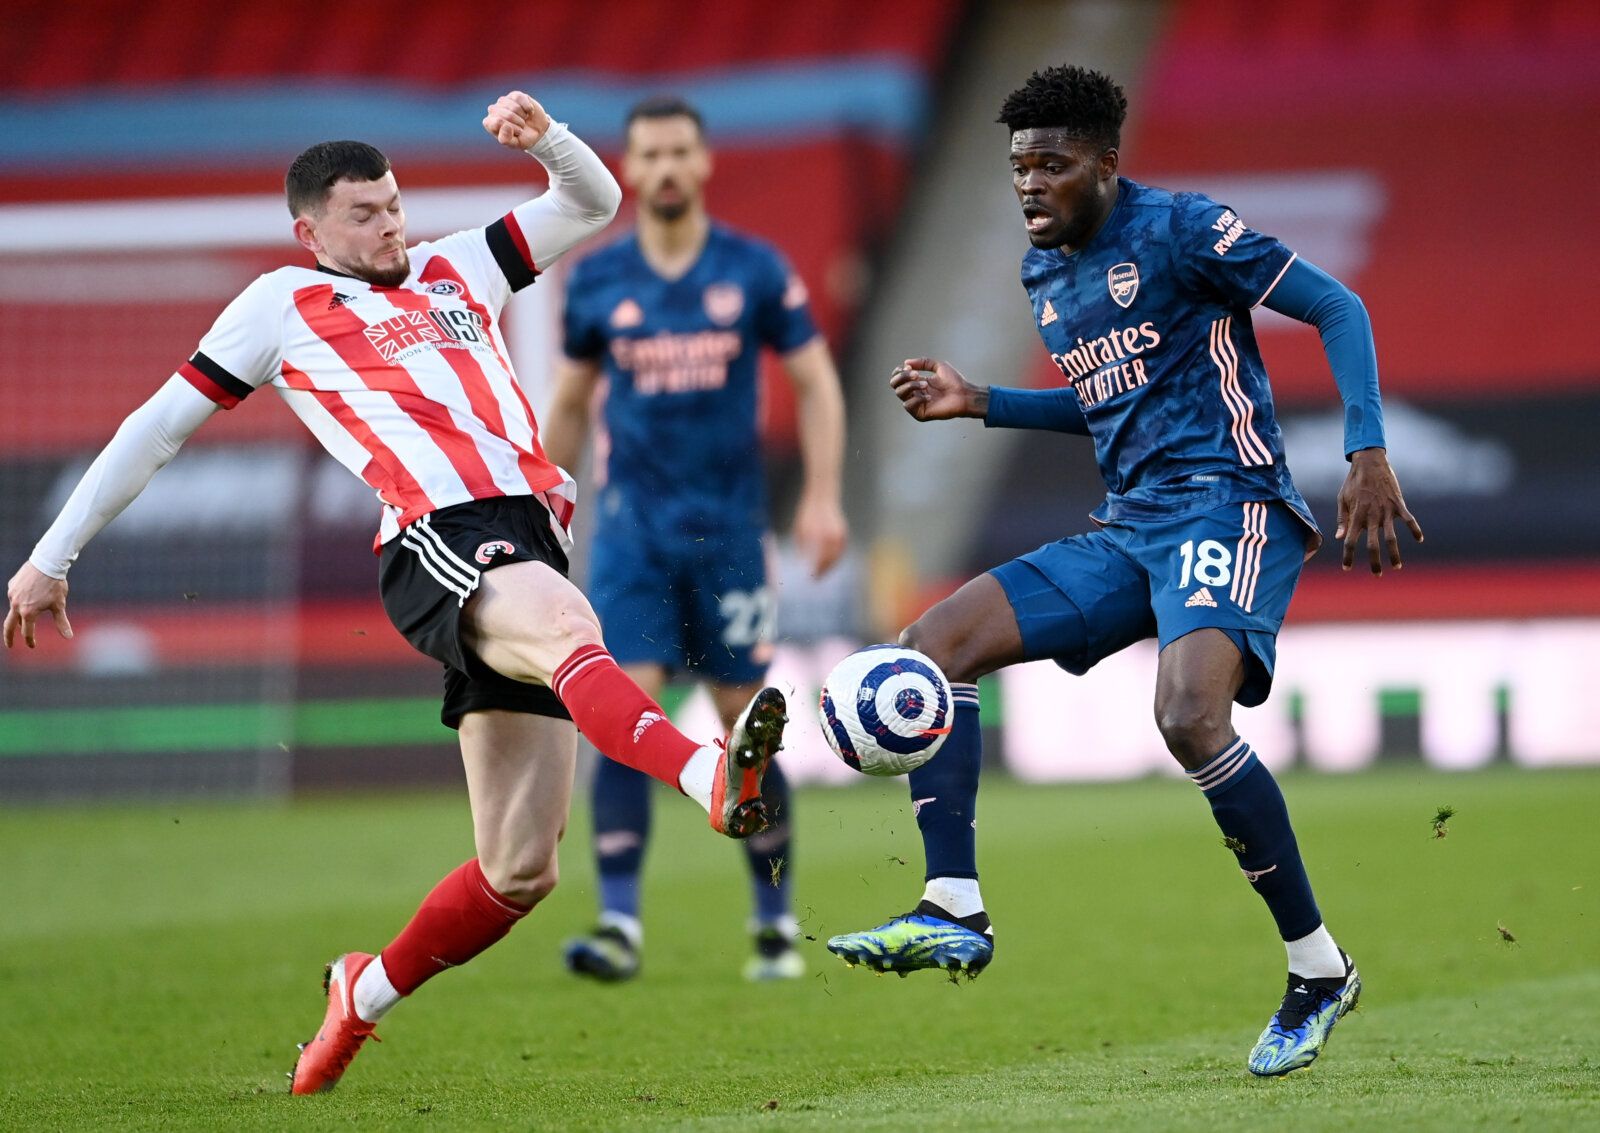 Soccer Football - Premier League - Sheffield United v Arsenal - Bramall Lane, Sheffield, Britain - April 11, 2021 Arsenal's Thomas Partey in action with Sheffield United's Oliver Burke Pool via REUTERS/Laurence Griffiths EDITORIAL USE ONLY. No use with unauthorized audio, video, data, fixture lists, club/league logos or 'live' services. Online in-match use limited to 75 images, no video emulation. No use in betting, games or single club /league/player publications.  Please contact your account r